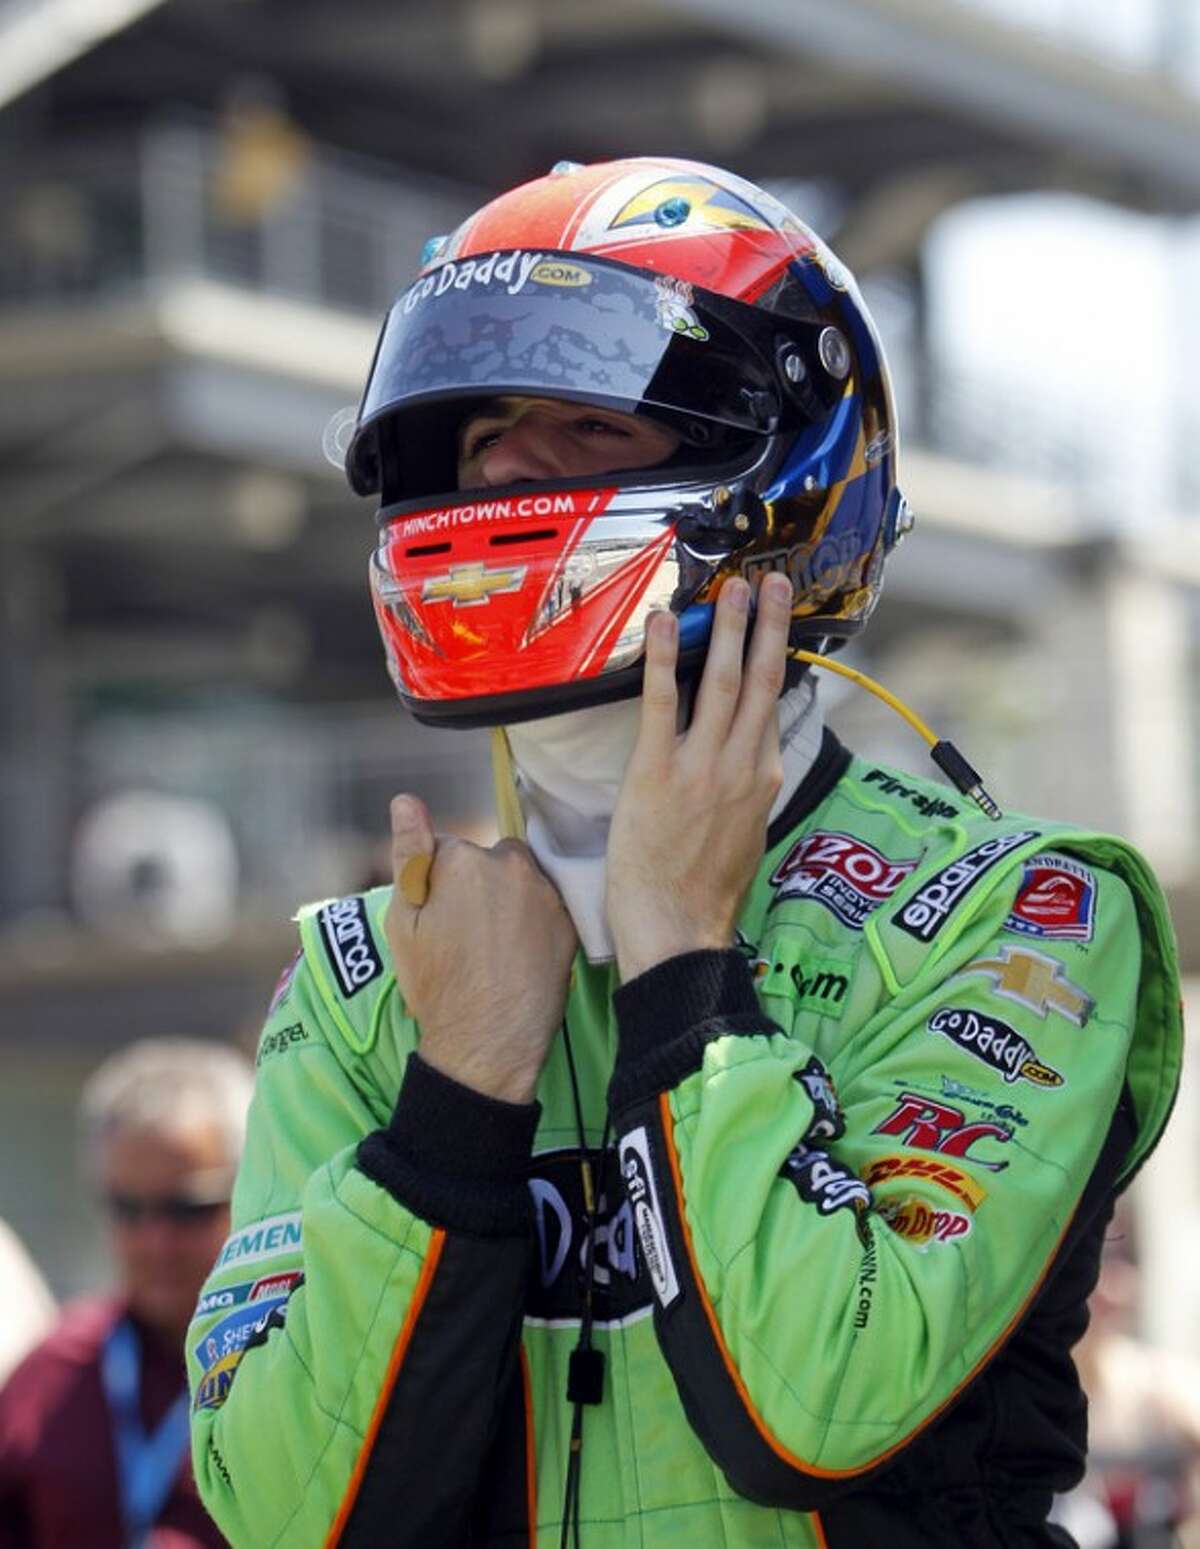 IndyCar driver James Hinchcliffe, of Canada, prepares to drive during practice for the Indianapolis 500 auto race at the Indianapolis Motor Speedway in Indianapolis, Friday, May 18, 2012. (AP Photo/Tom Strattman)